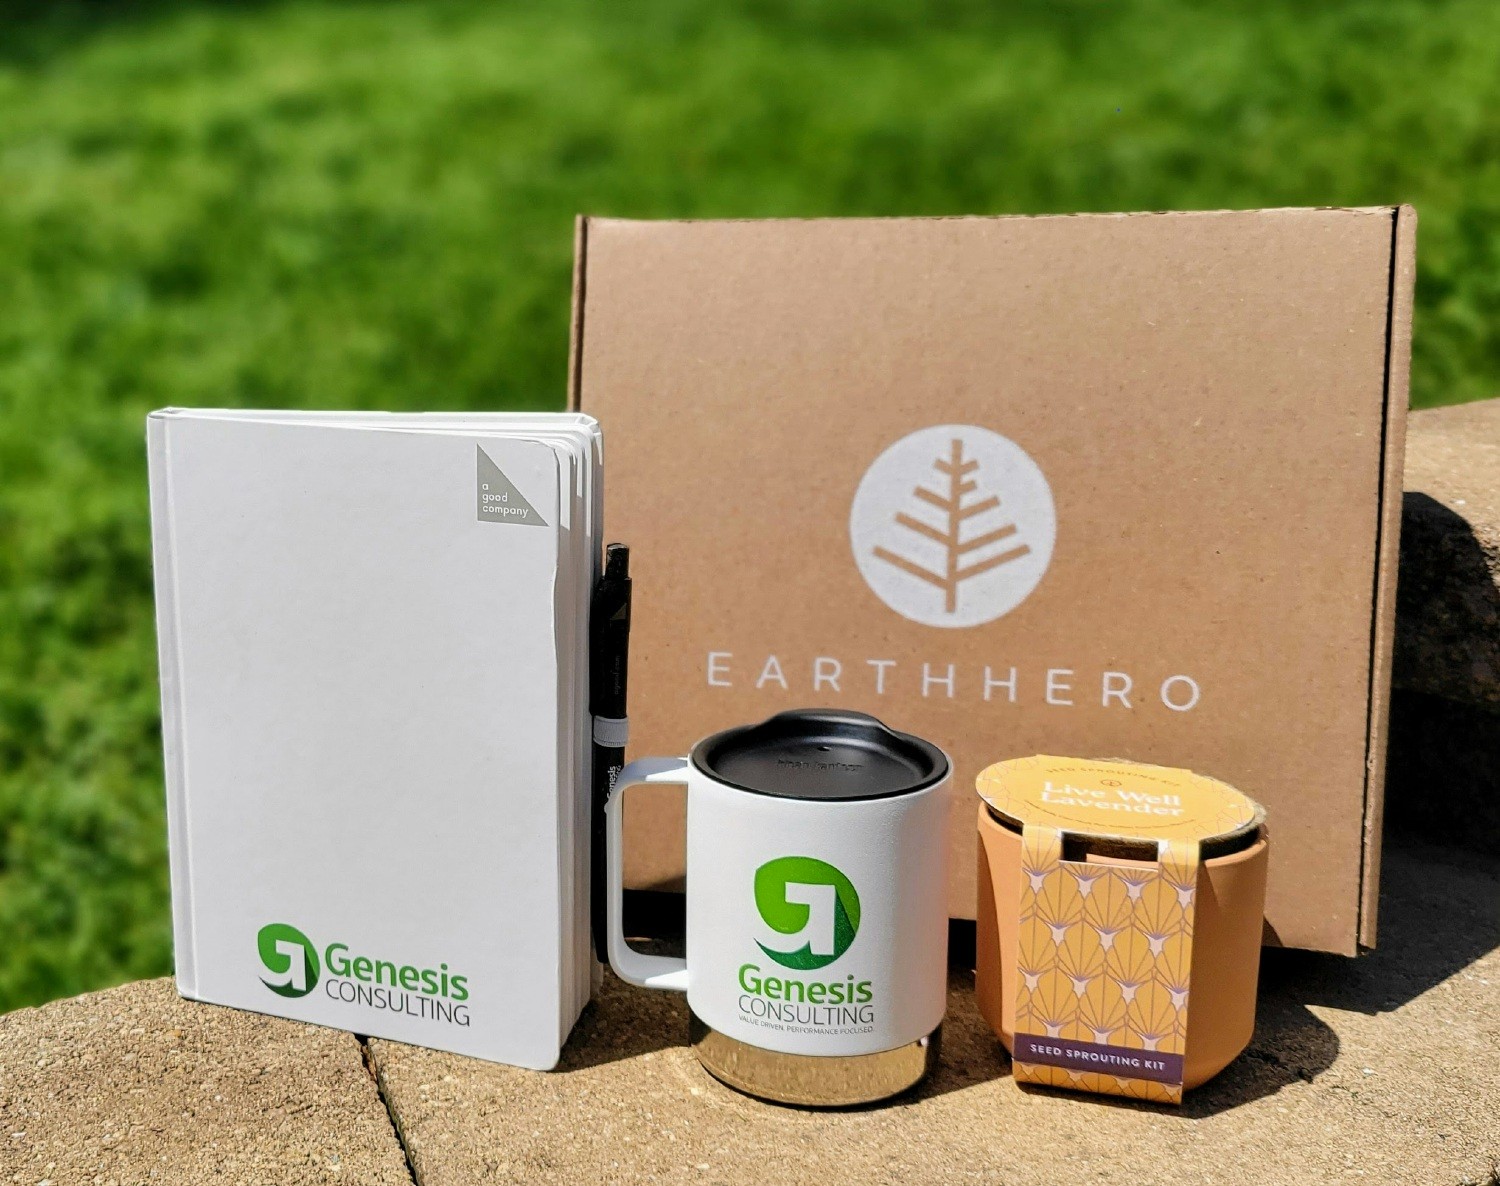 Genesis provides eco-friendly welcome kits to new hires.